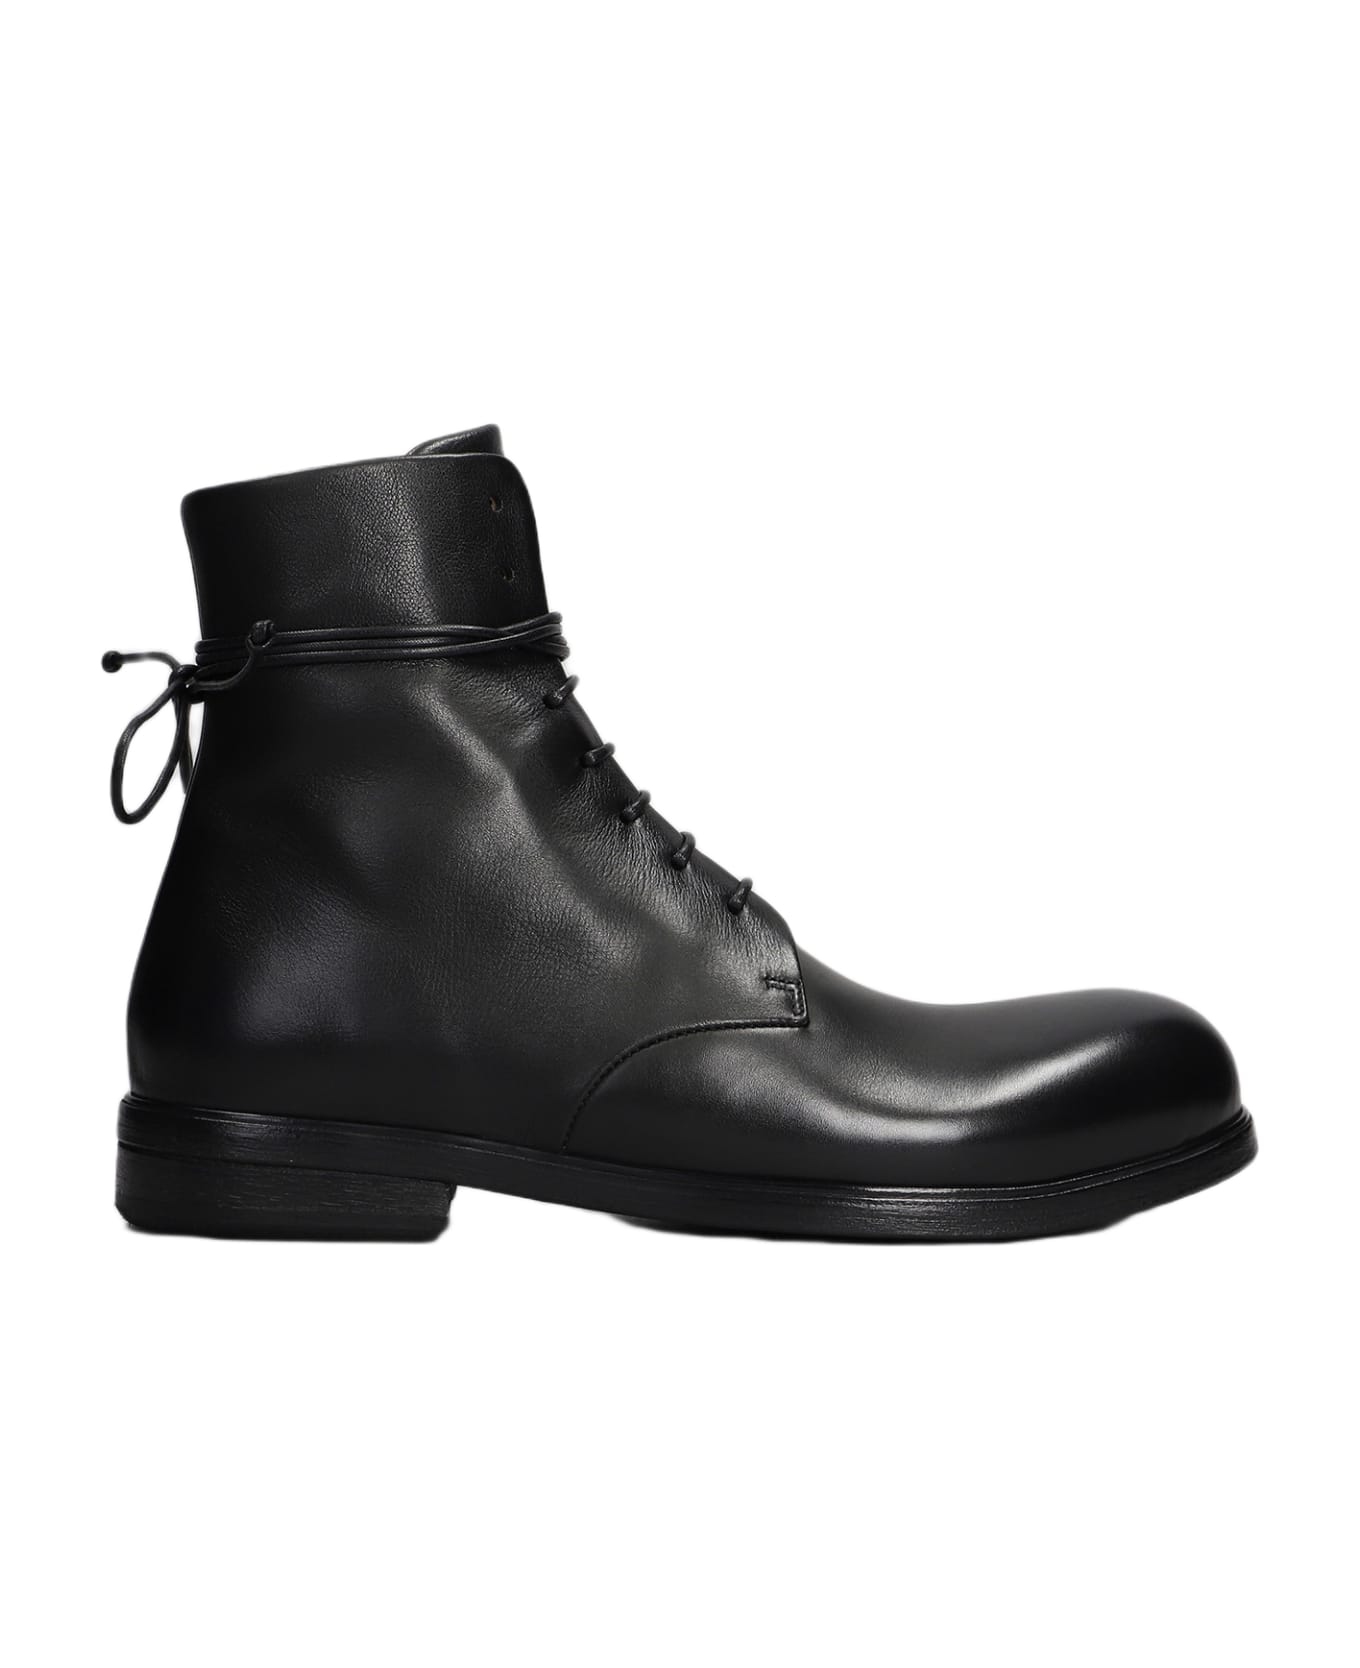 Marsell Ankle Boots In Black Leather - black